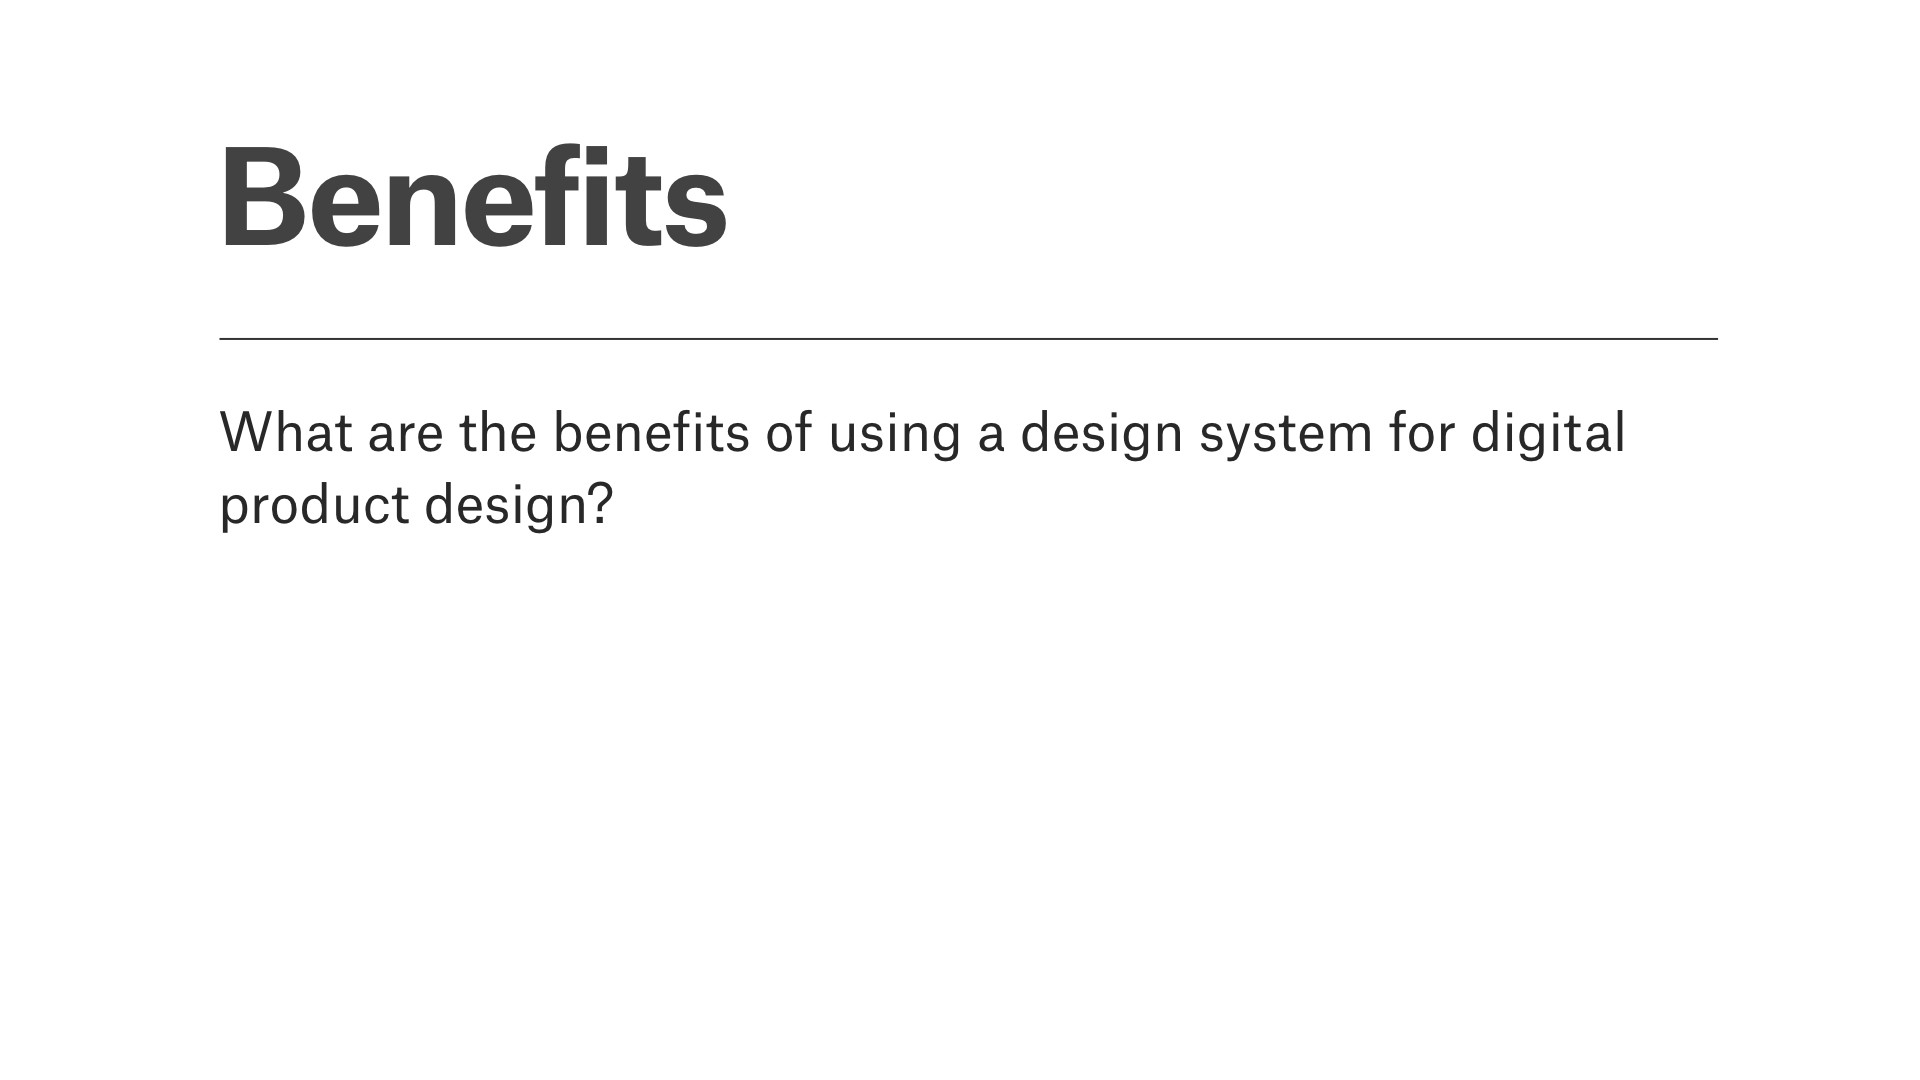 Benefits of Design Systems